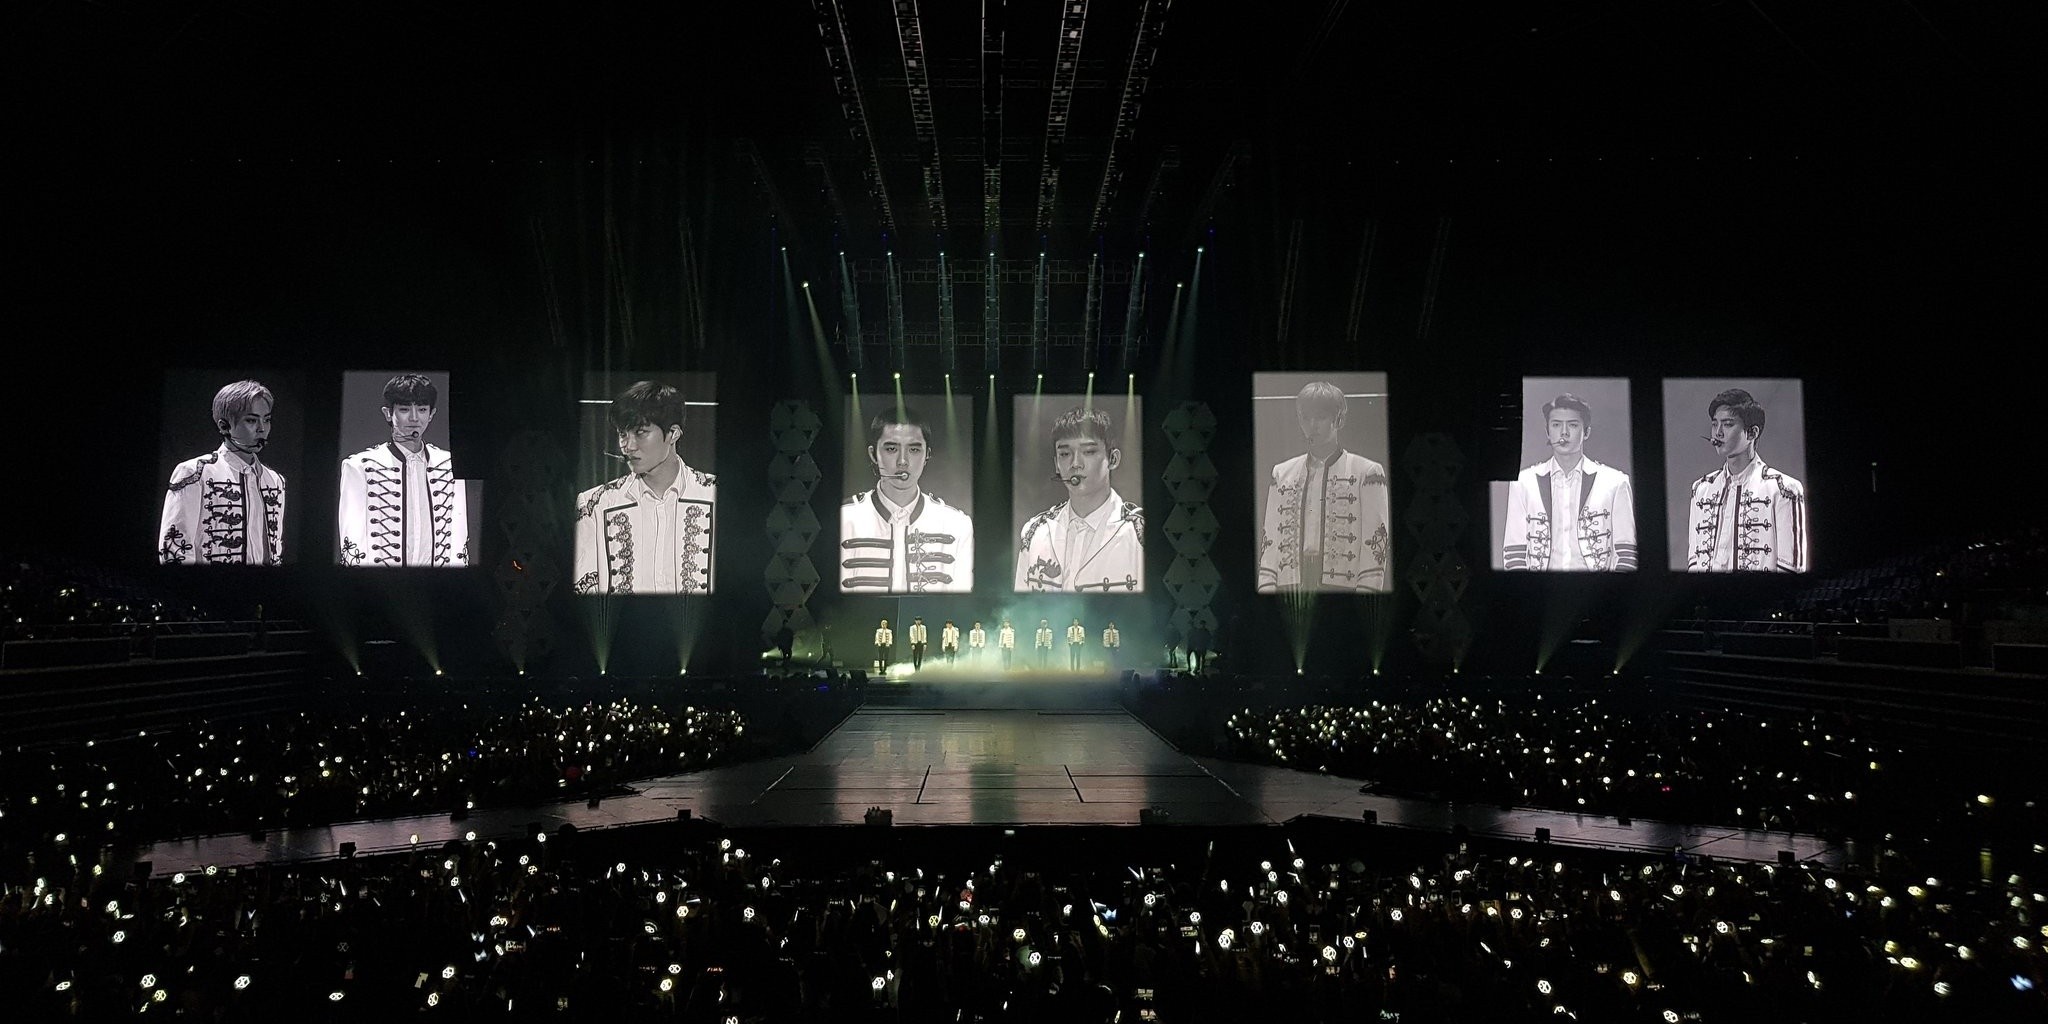 EXO's fourth concert in Singapore was a huge success, but how did it stack up against previous shows? — gig report